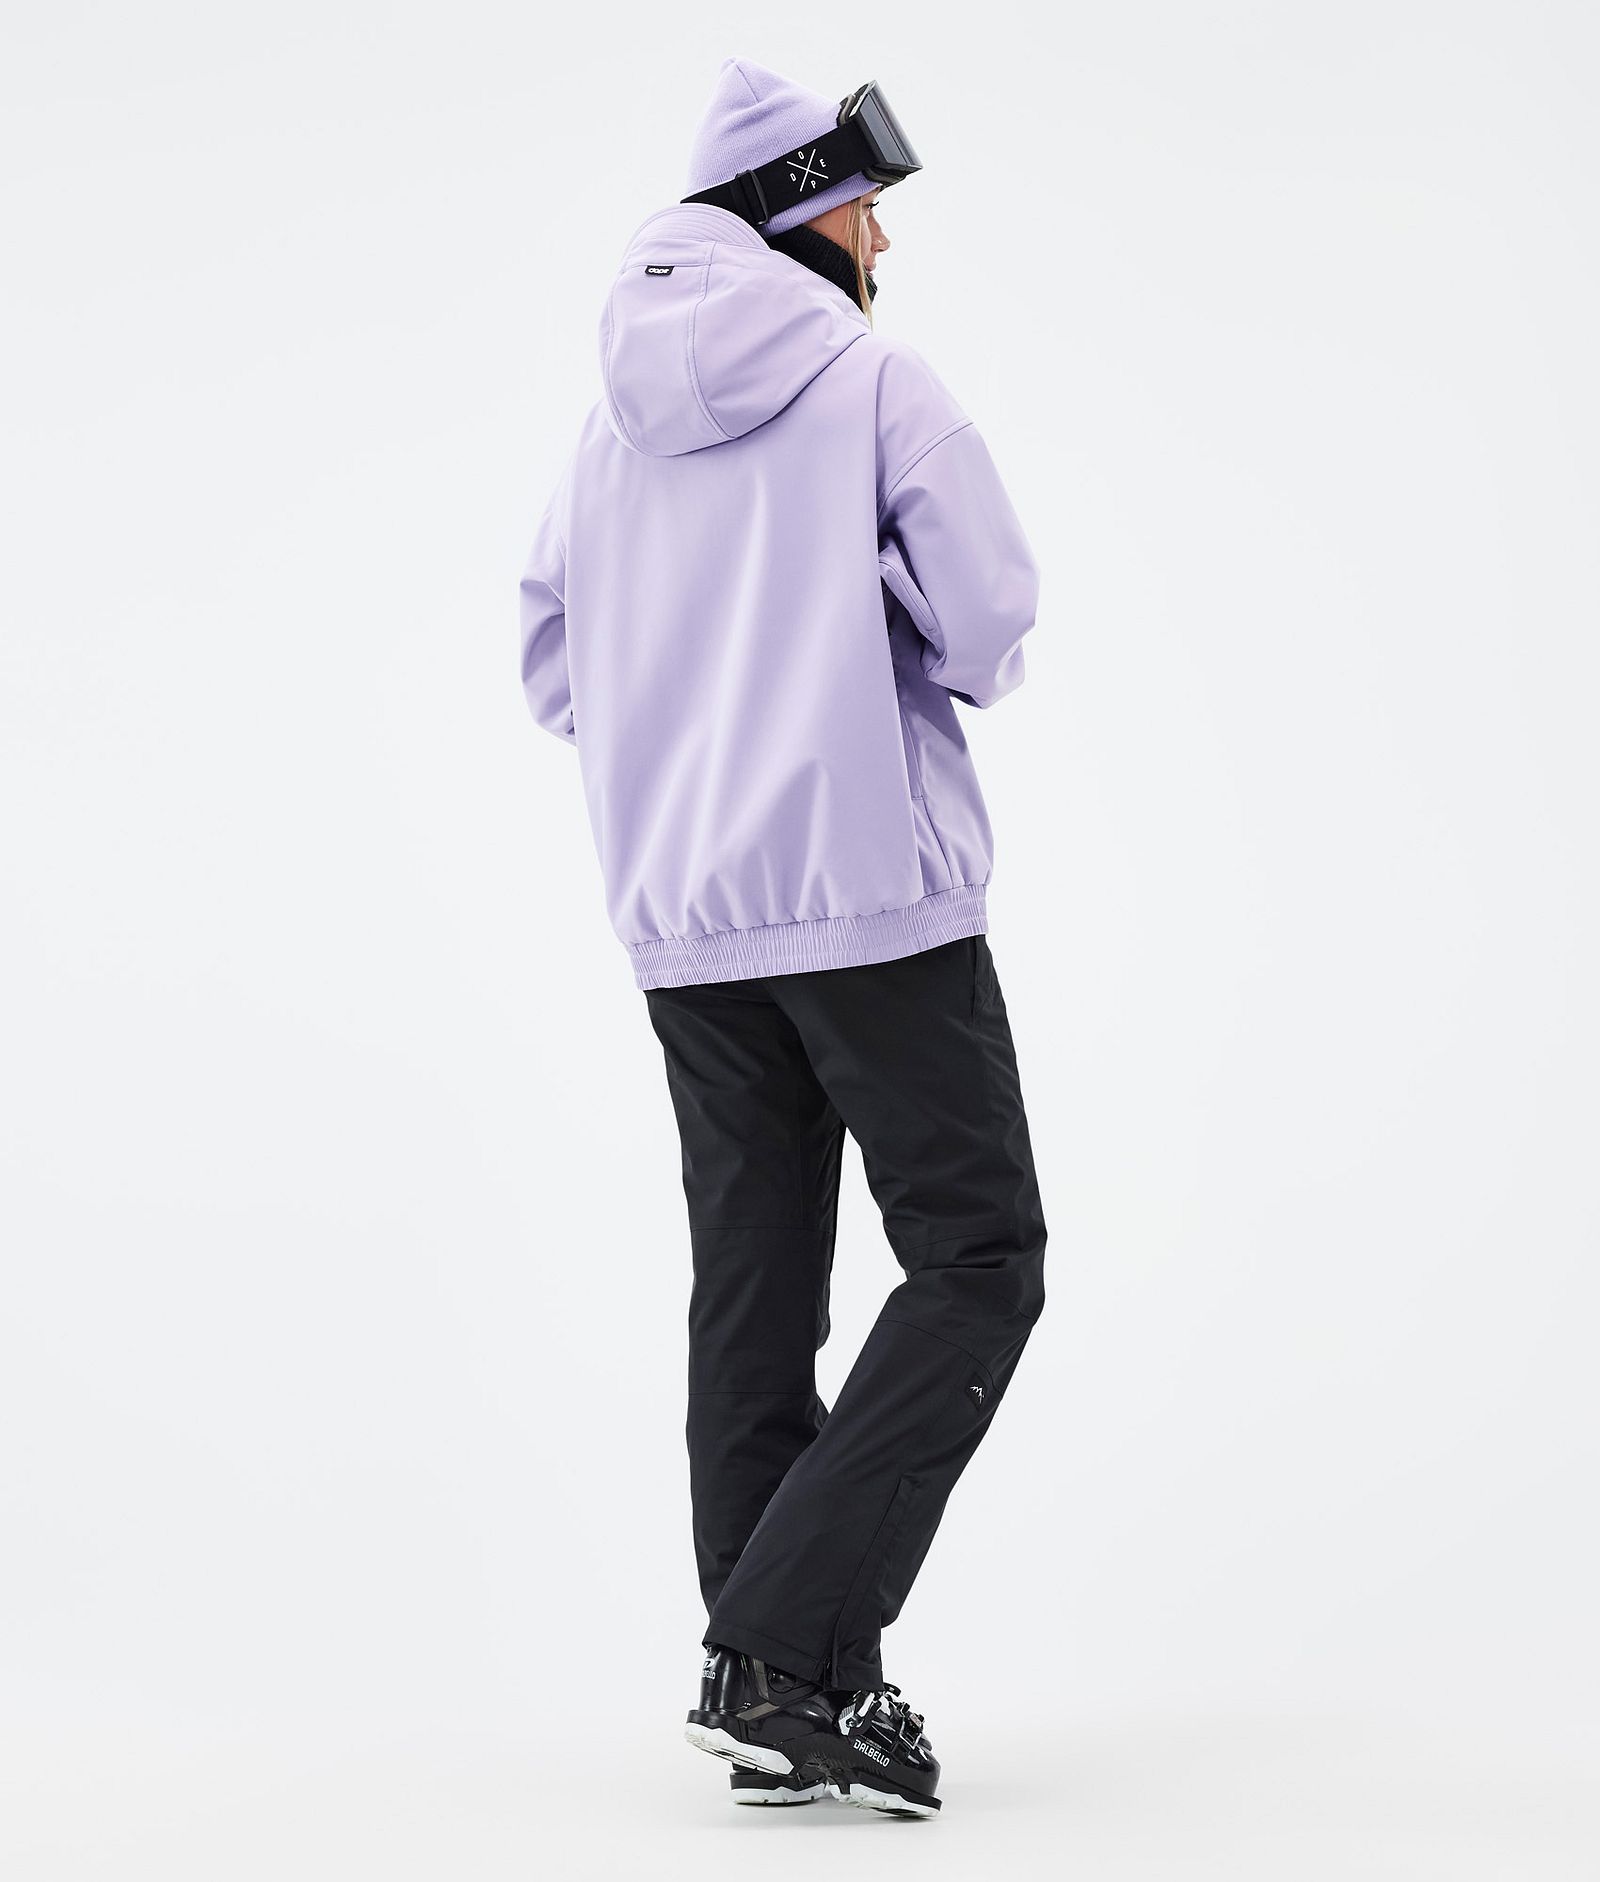 Cyclone W Ski Jacket Women Faded Violet, Image 4 of 8